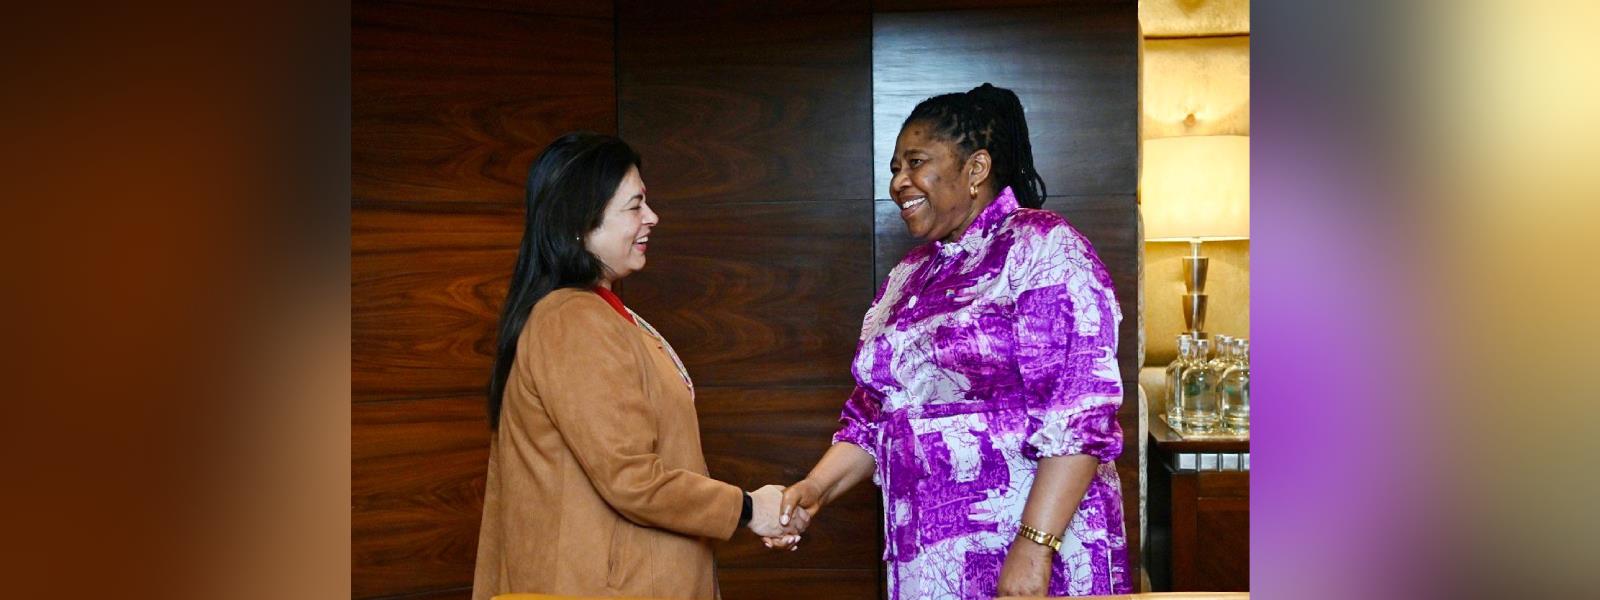 Minister of State for External Affairs Smt. Meenakashi Lekhi met H.E. Ms. Candith Mashego Dlamini, Deputy Minister of International Relations and Cooperation of South Africa on the sidelines of Raisina Dialogue 2024 in New Delhi